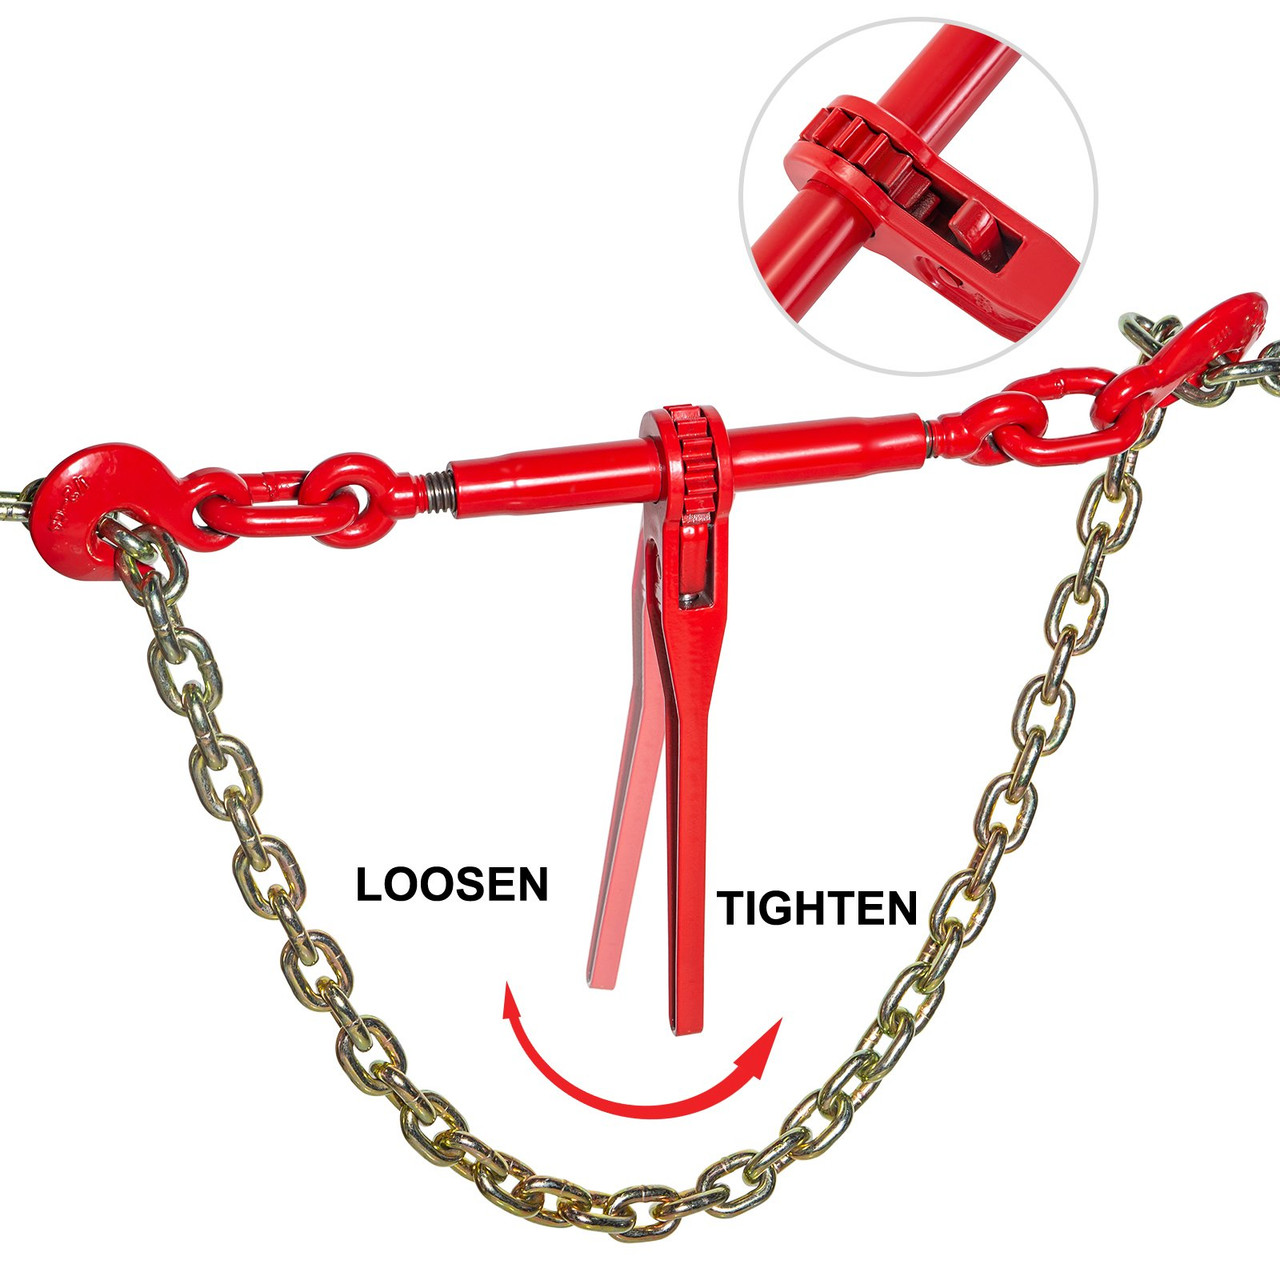 Chain and Binder Kit 5/16in-3/8in, Ratchet Load Binders 6600lbs Working Strength, Ratchet Binders and Chains, 5/16in x 10ft Chains w/ G70 Hooks, for Truck, Tie Down, Hauling, Towing